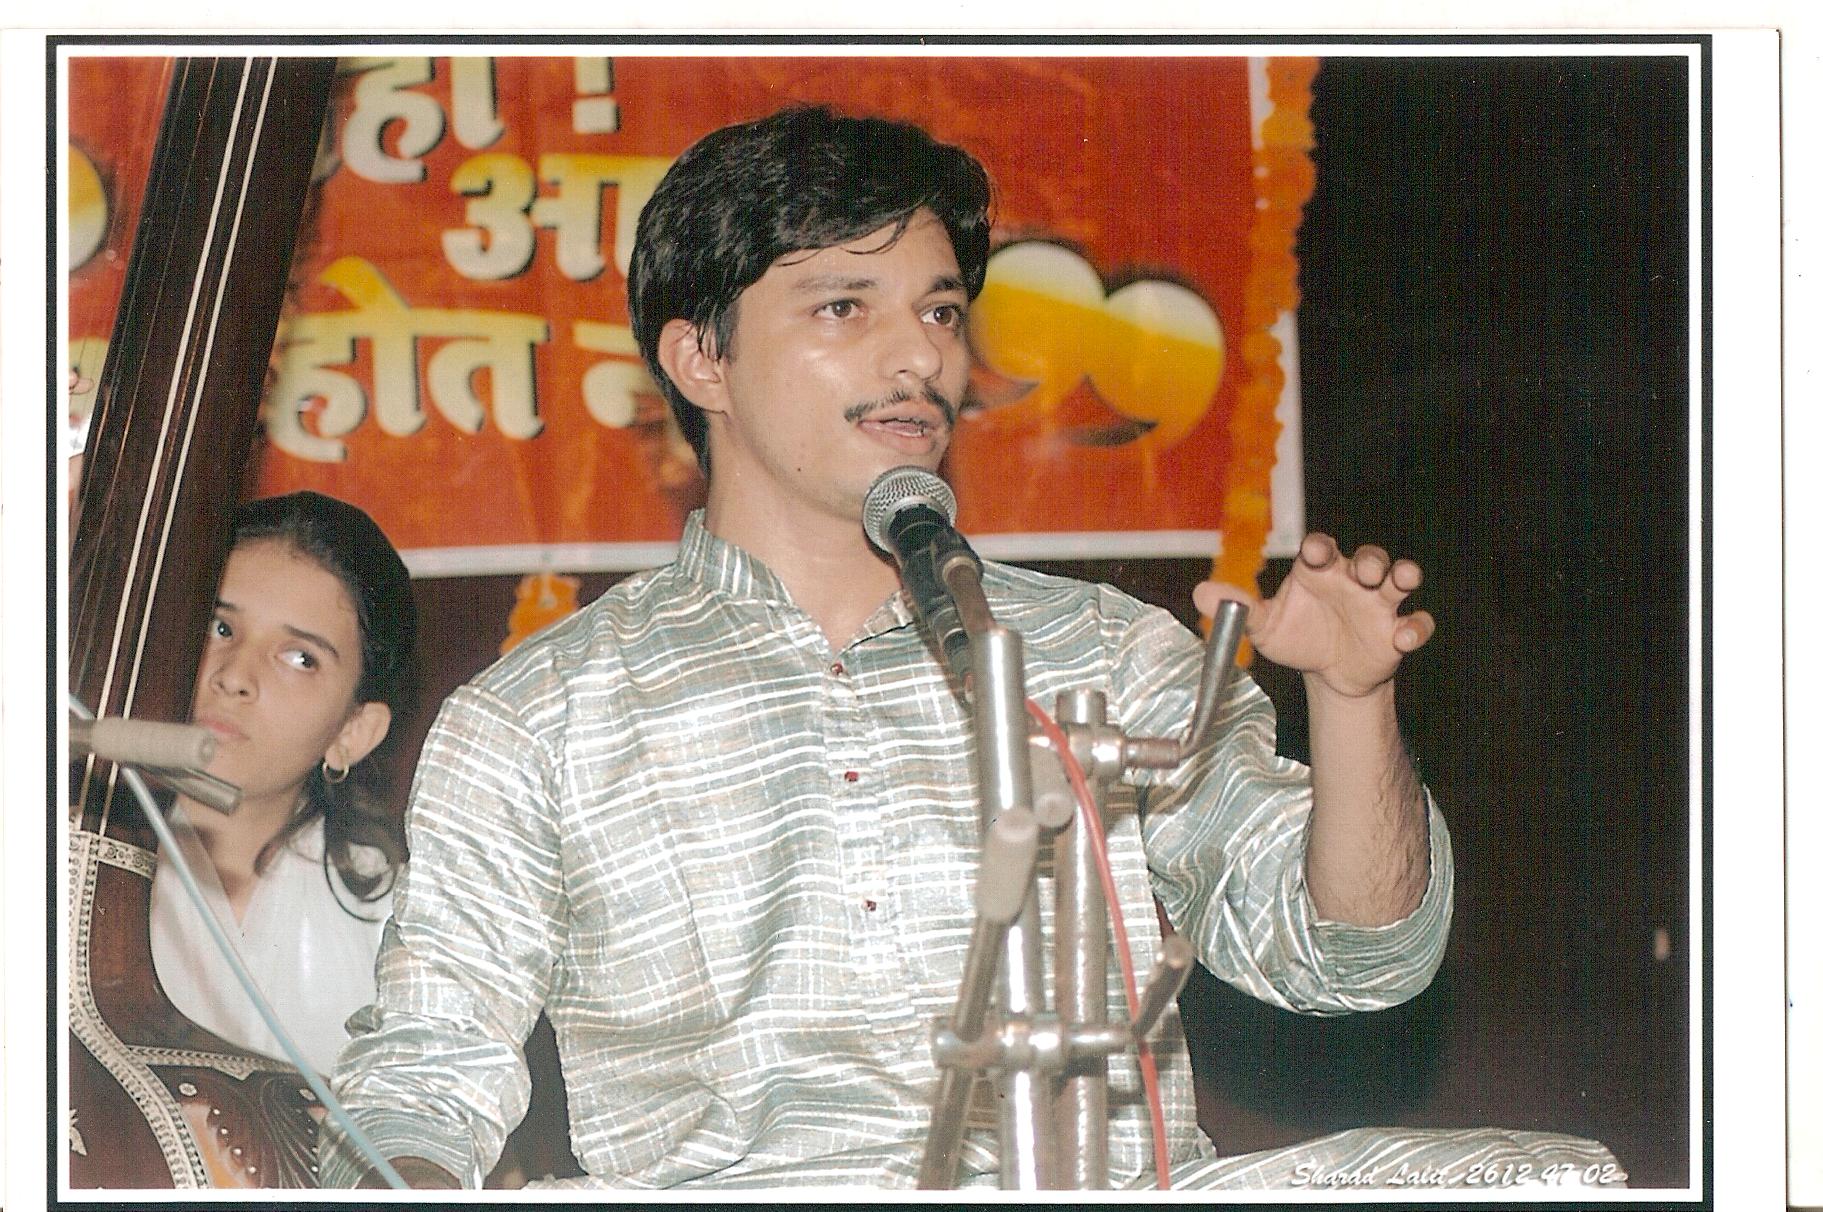 Classical singer Harshad Dongare in one of his concerts